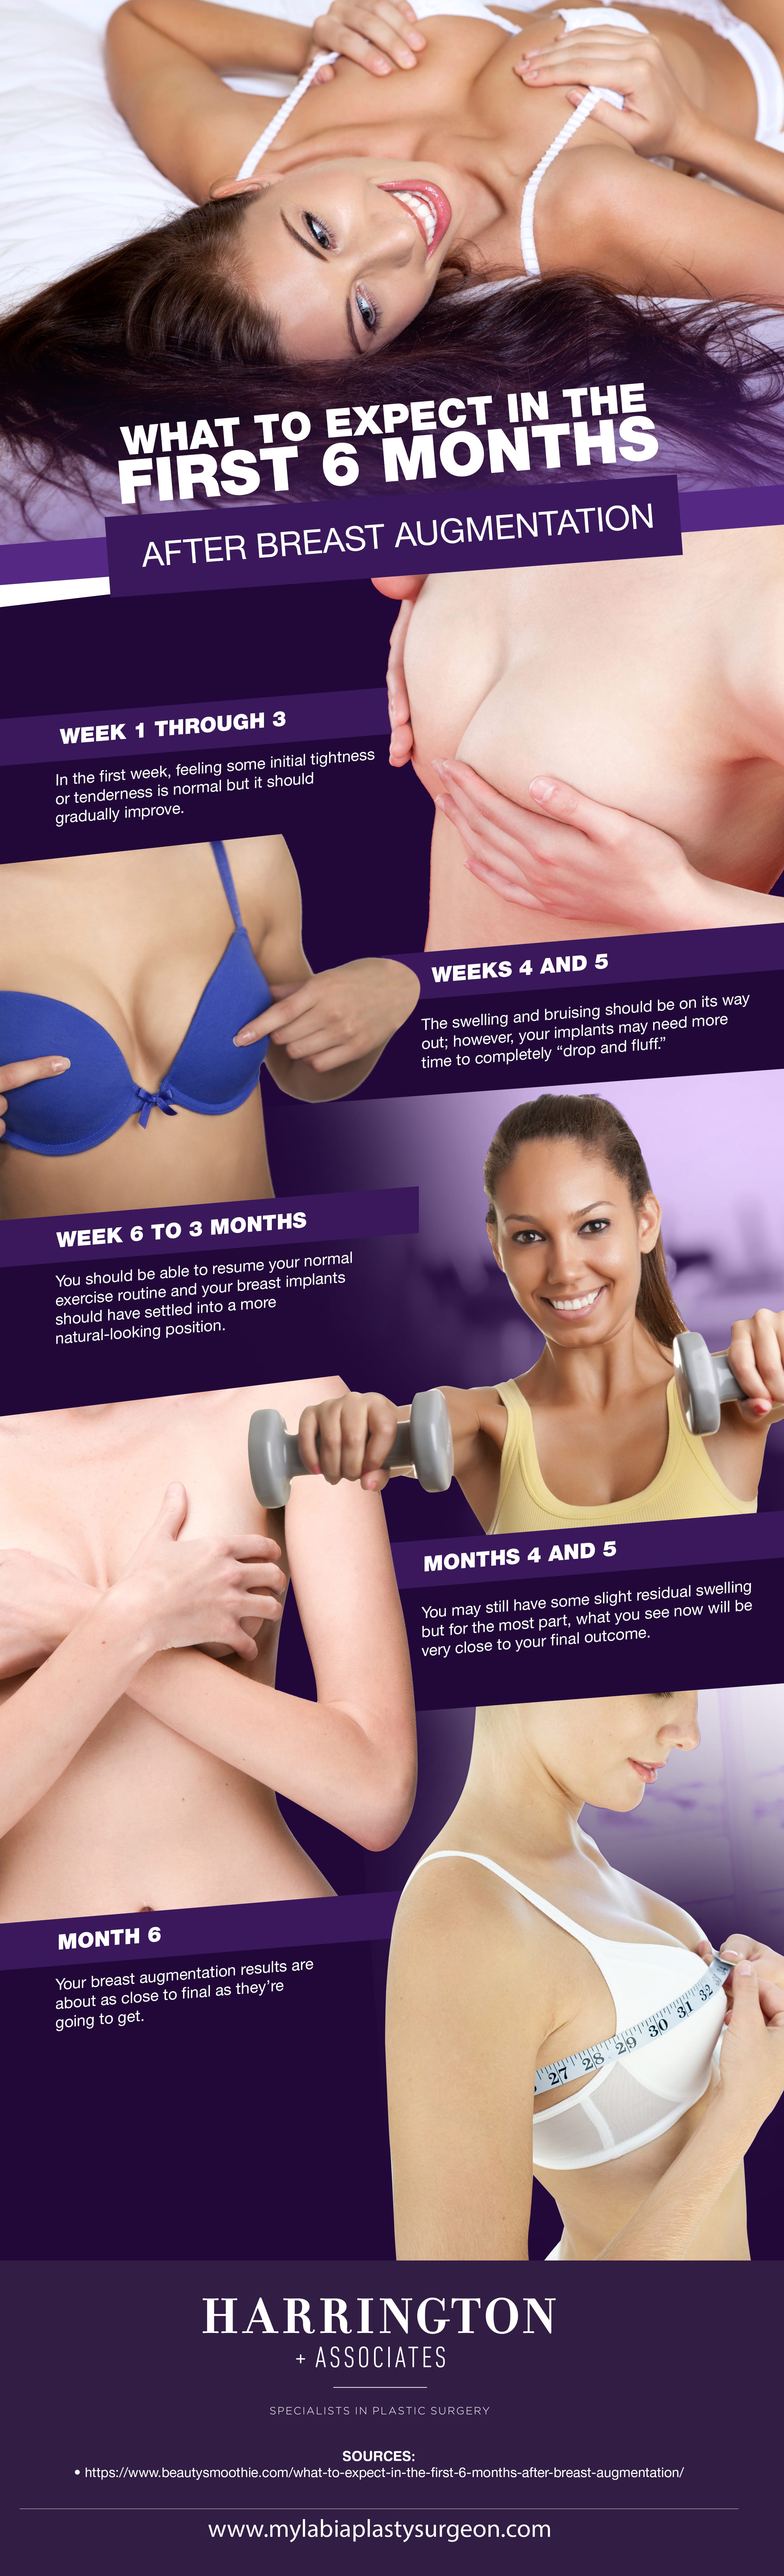 What to Expect in the First 6 Months After Breast Augmentation [Infographic] img 1